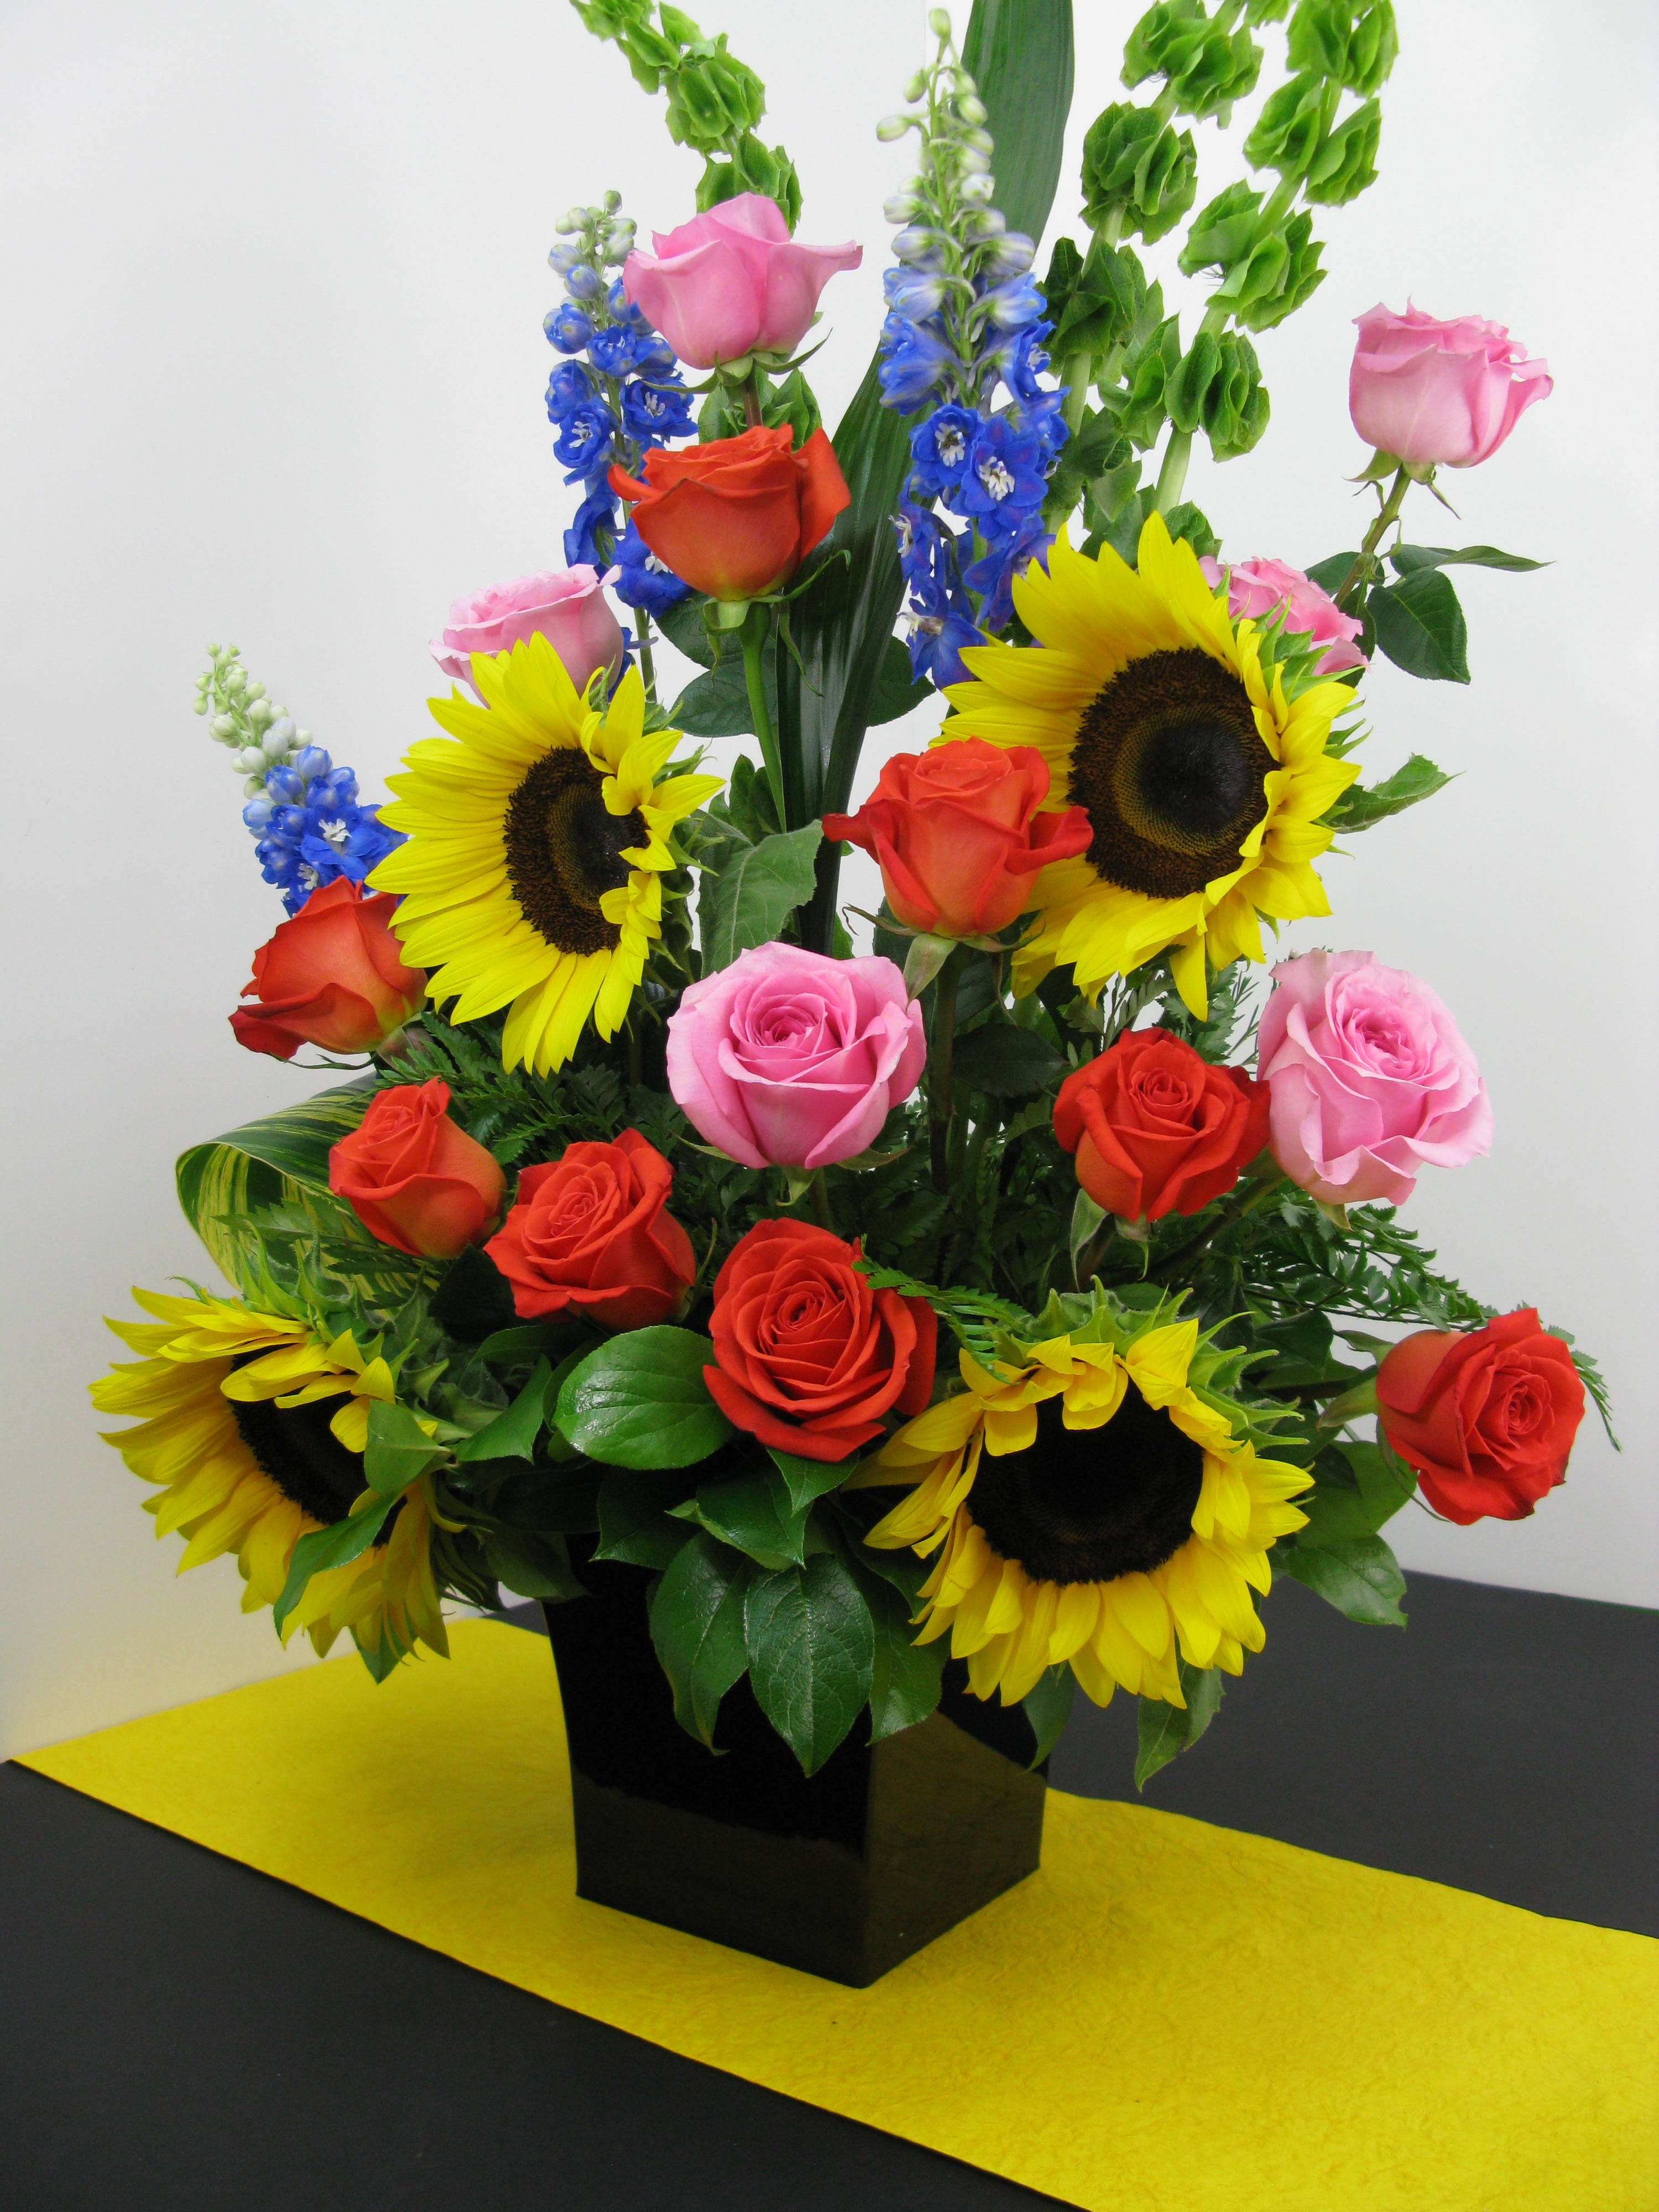 Festive Flowers - A cornucopia of flowers that represent the lively Miami experience. Perfect for any festive occasion this arrangement will bring life and joy to anyone with the roses and sunflowers and original colors it contains.